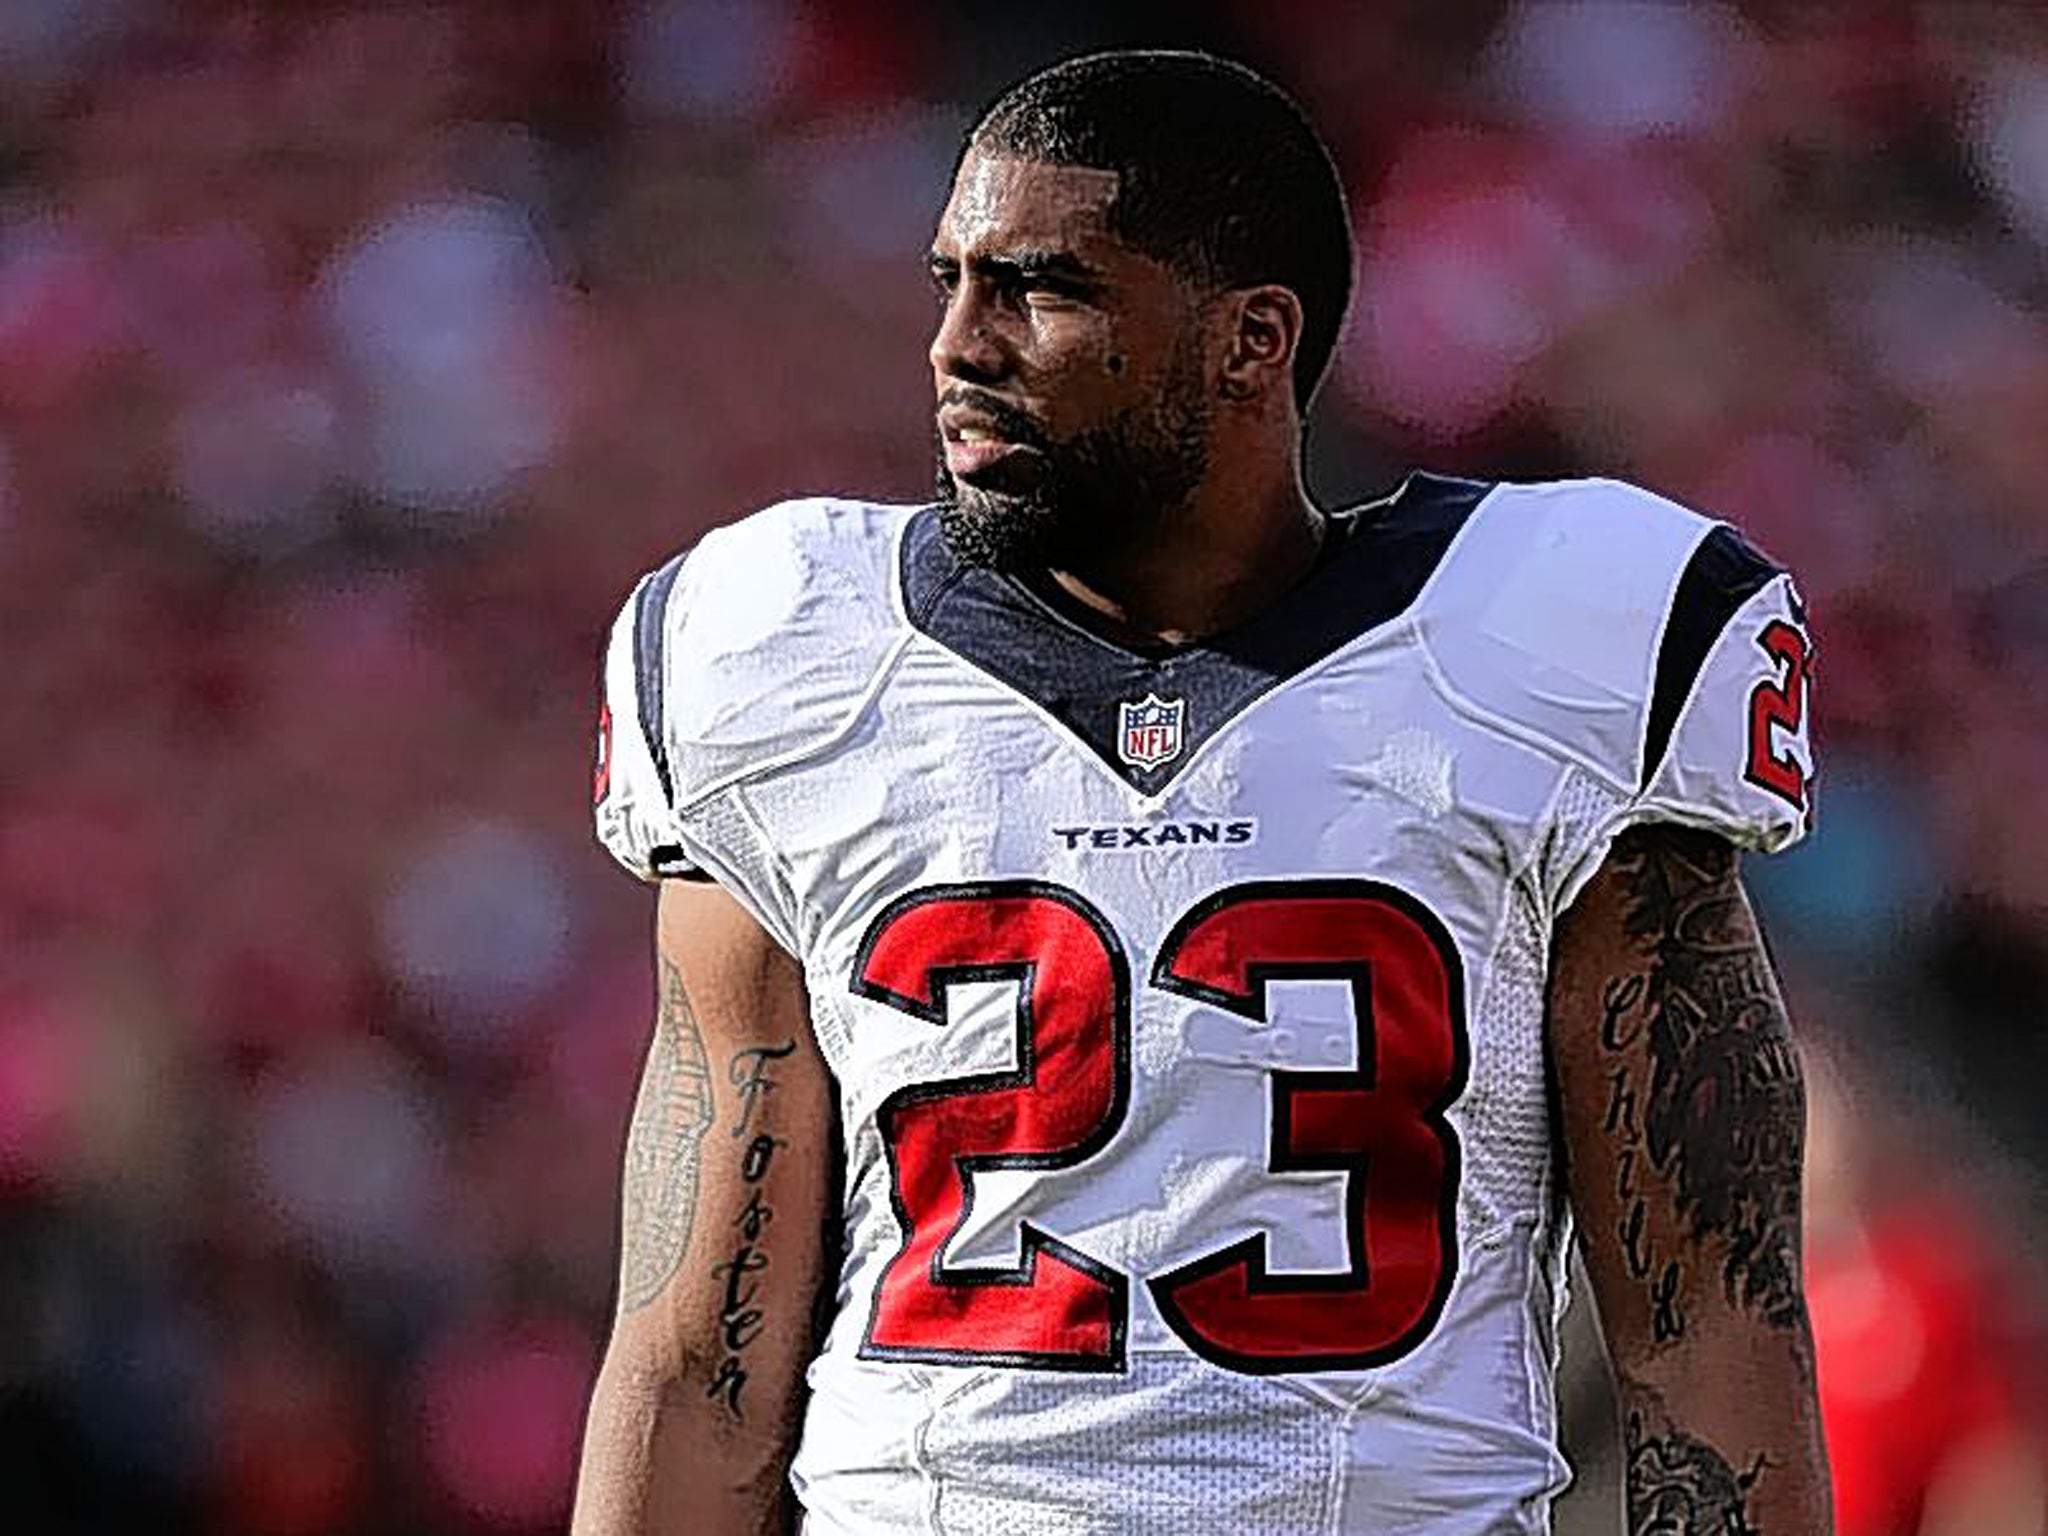 Stock man: Houston’s Arian Foster is the first to sell shares in himself